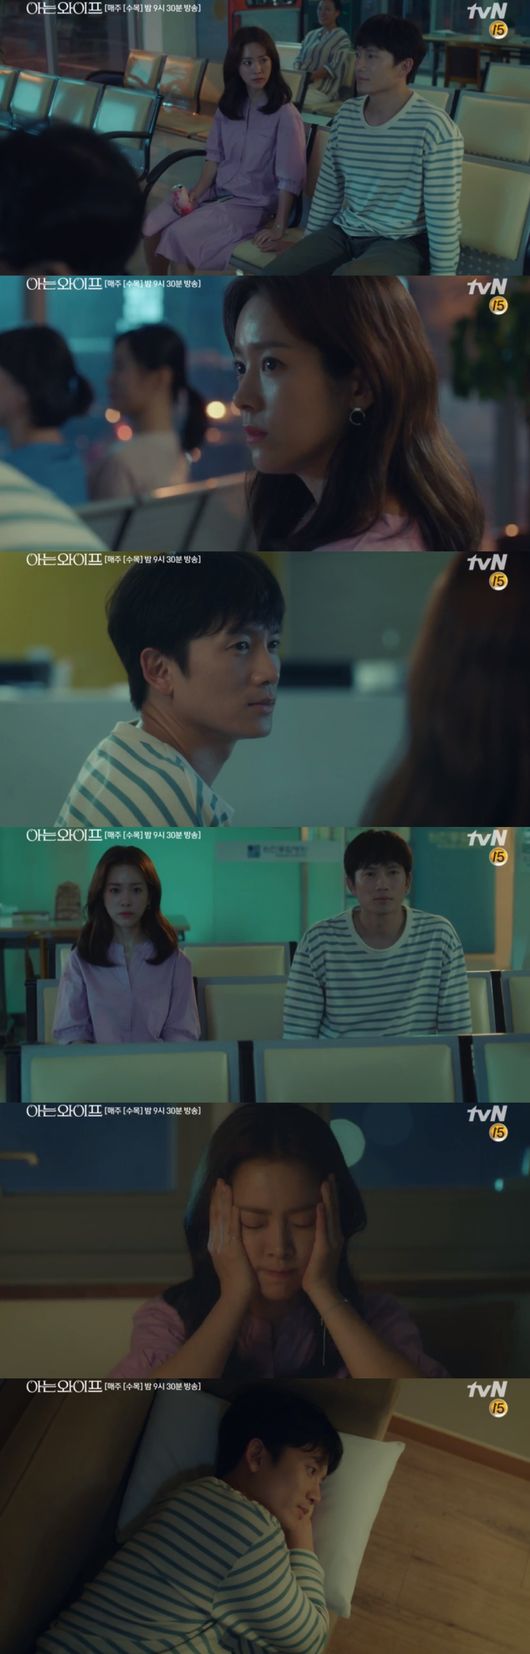 Han Ji-min of Knowing Wife finds out that the man in the dream is Ji Sung.In the 9th episode of TVNs Drama Knowing Wife (playplayplay by Yang Hee-seung and director Lee Sang-yeob), which aired on the 29th, Ju-hyuk (Ji Sung) and Woojin (Han Ji-min) were confused as their hearts grew toward each other.Joo Hyuk was not satisfied with his life and changed his past.So, he is married to Hyewon (Ganghanna), not Woojin, and Woojin appeared at the bank and eventually the relationship between the two continued.But before the fate changed, Ju-hyeok, who had a memory, was attracted to Woojin, which was also the same for Woojin.Woojin was not living without a complete memory of Juhyeok, and he repeatedly appeared in his dreams of Memory before his fate changed.However, the face of the man appearing in the dream did not appear clearly, so he lived with frustration.Then, Joo Hyuk and Woojin, who met each other, tried to deny the fateful attraction toward each other, and they continued to enter each others lives.On the 29th broadcast, Woojin did not refuse to be attracted to Joo Hyuk, and on this day, Joo Hyuk was out of the situation when he was looking for Woojins mother together.As Hye-won knew this, the conflict began in earnest between the two, and eventually the misunderstanding about the outpatient was solved, but the cracks began between them.But the closer he got to the relationship between Joo Hyuk and Woojin, when they came across another meeting in the hospital.Joo Hyuk had to spend a day in the hospital due to her back treatment, and Woojin had to undergo a sleep test at the hospital because her mother (Lee Jung Eun) was irritated because she could not sleep.But Woojins mother entered the room where Joo Hyuks mother was, and Joo Hyuk and Woojin came across.At night, Joo Hyuk and Woojin met in the lobby, and Woojin asked Joo Hyuk how he knew how to take his medicine, and Joo Hyuk said, It was recommended by the pharmacist.Later, they watched TV together, and accidentally touched their fingers and felt strange feelings.Woojin felt excited and Woojin returned to the room and recalled that he had touched his fingers with Juhyuk.Then the preview video was released, and Woojins dream reappeared, this time Ji Sungs face was seen as it was.In addition, Woojin said, Did you know from the beginning of my mother? Woojin finds out that the man who seemed blurry in his dream is Ji Sung, and I am curious about whether their relationship will change.TVN Knowing Wife broadcast capture